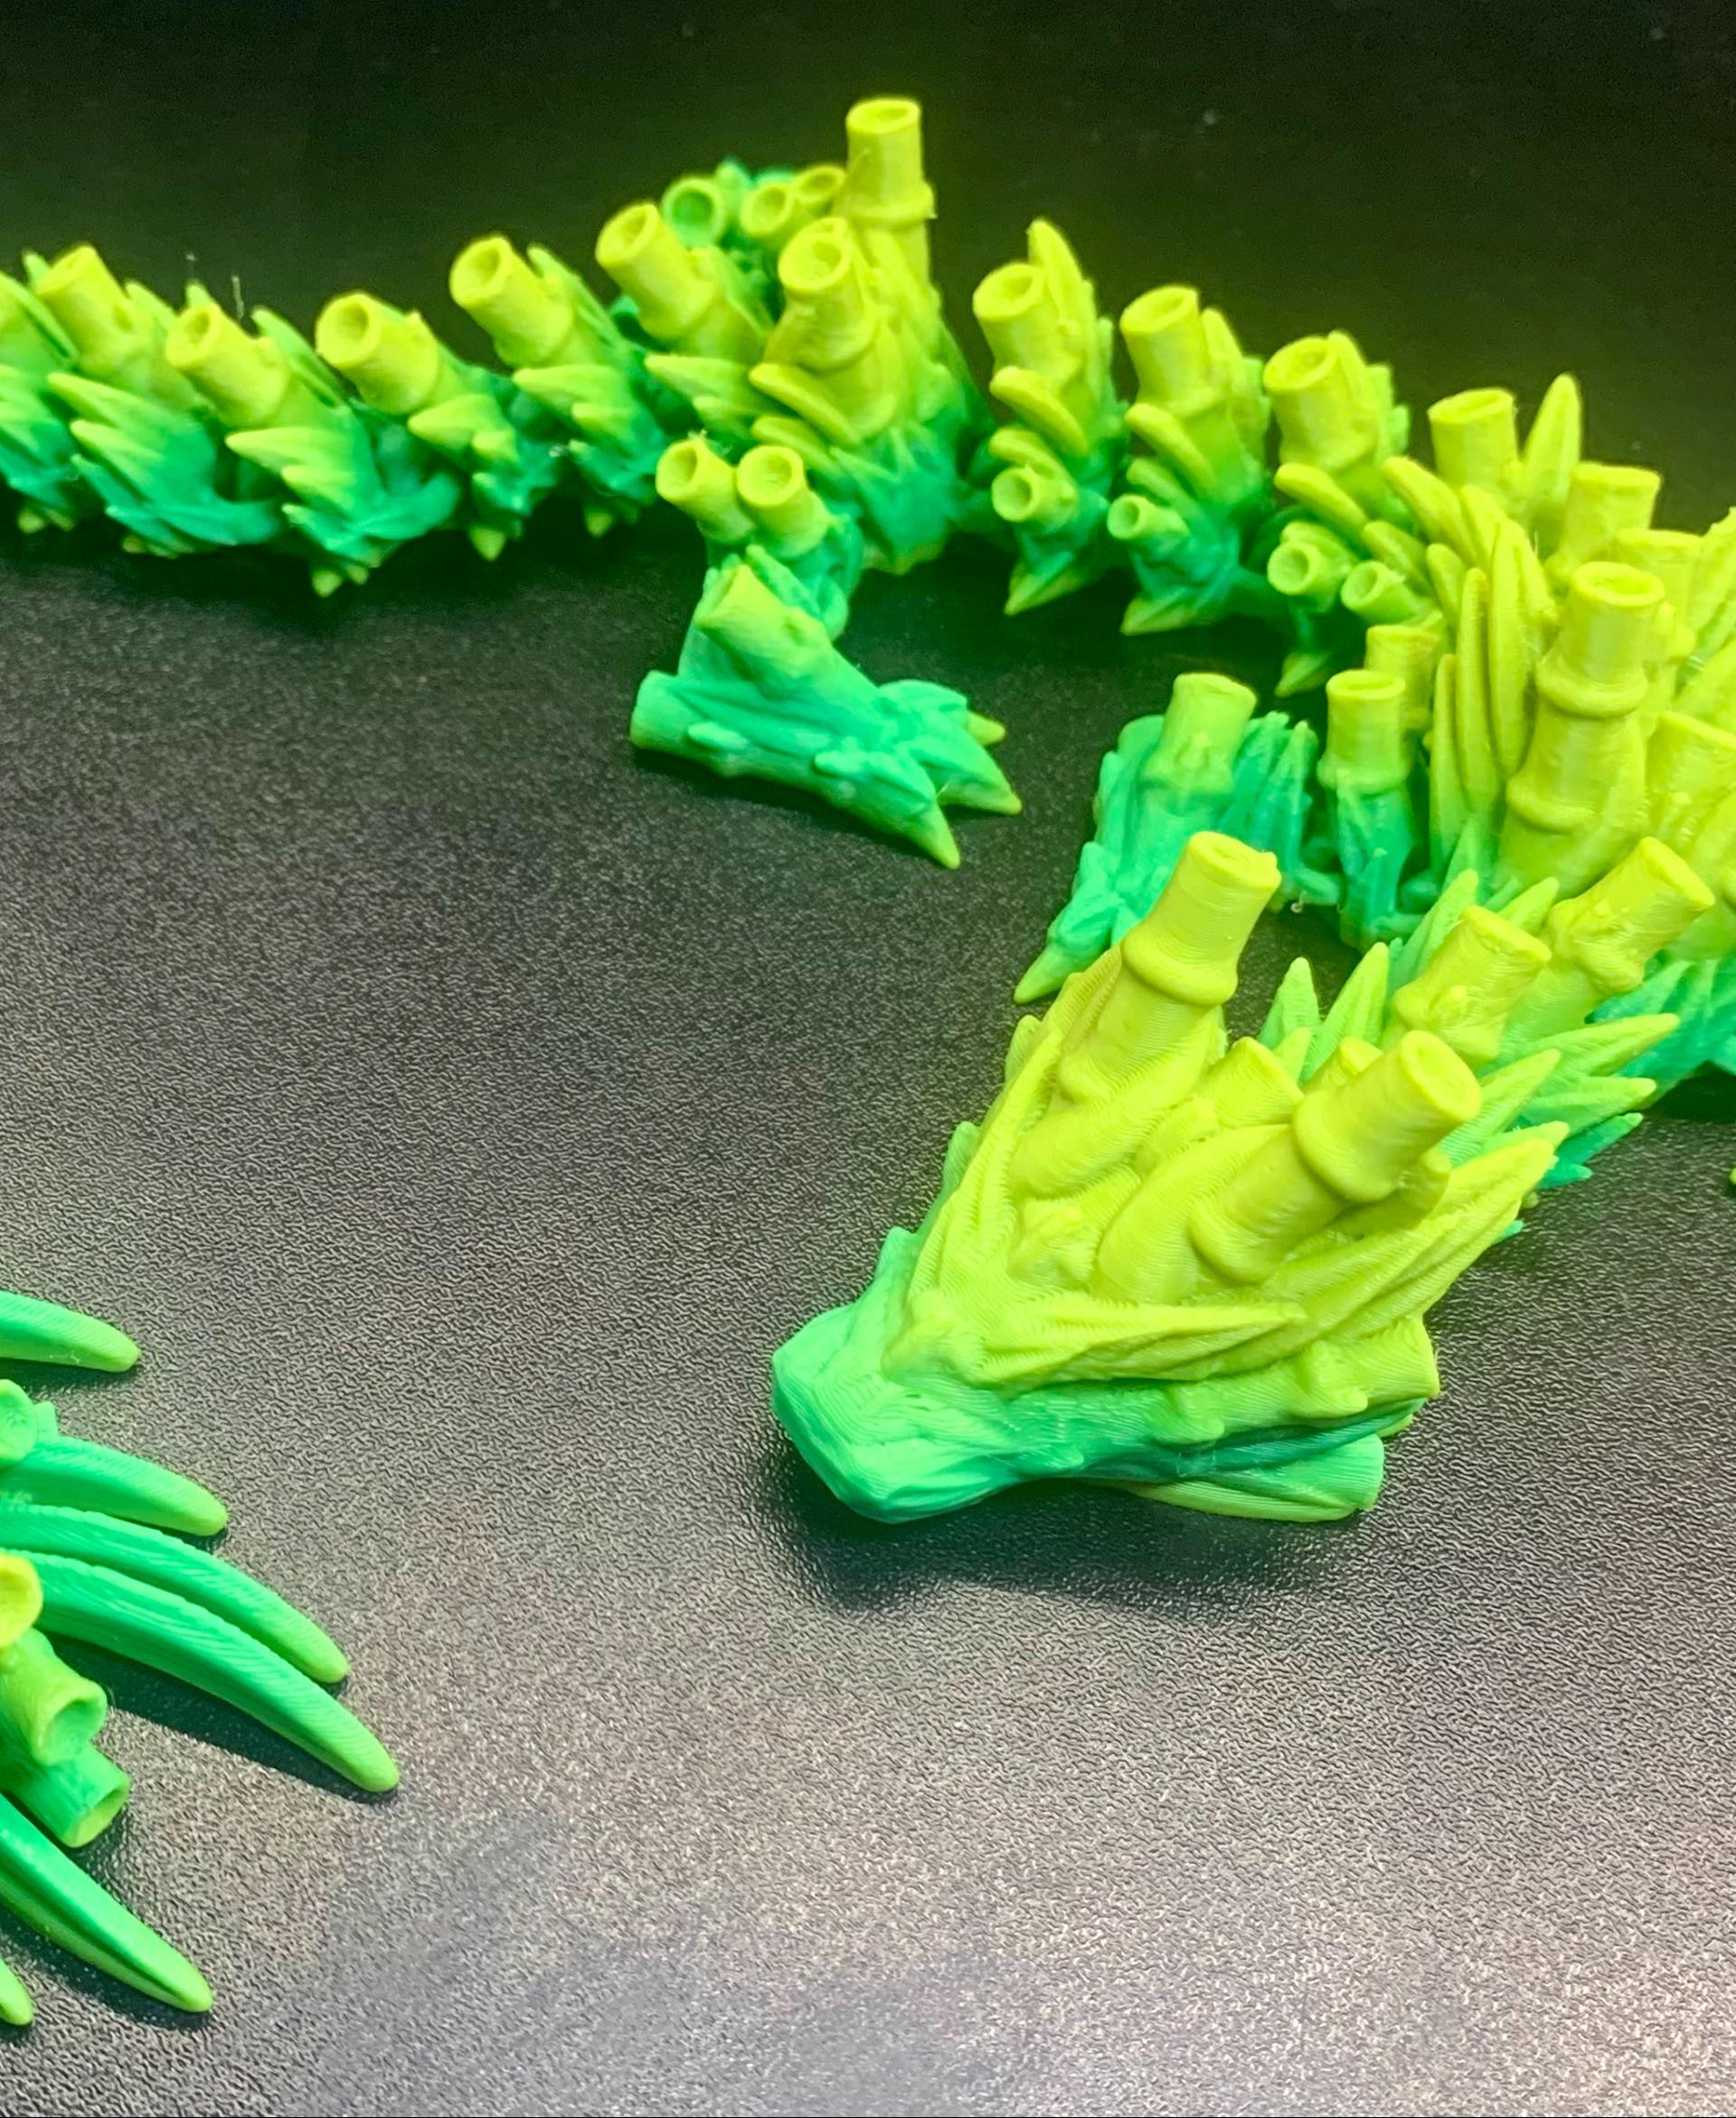 Bamboo Dragon Cinderwing3D X BambuLab - Love this one so much!! 
The filament I used is the same iSANMATE PLA used in the designer's pics - 3d model